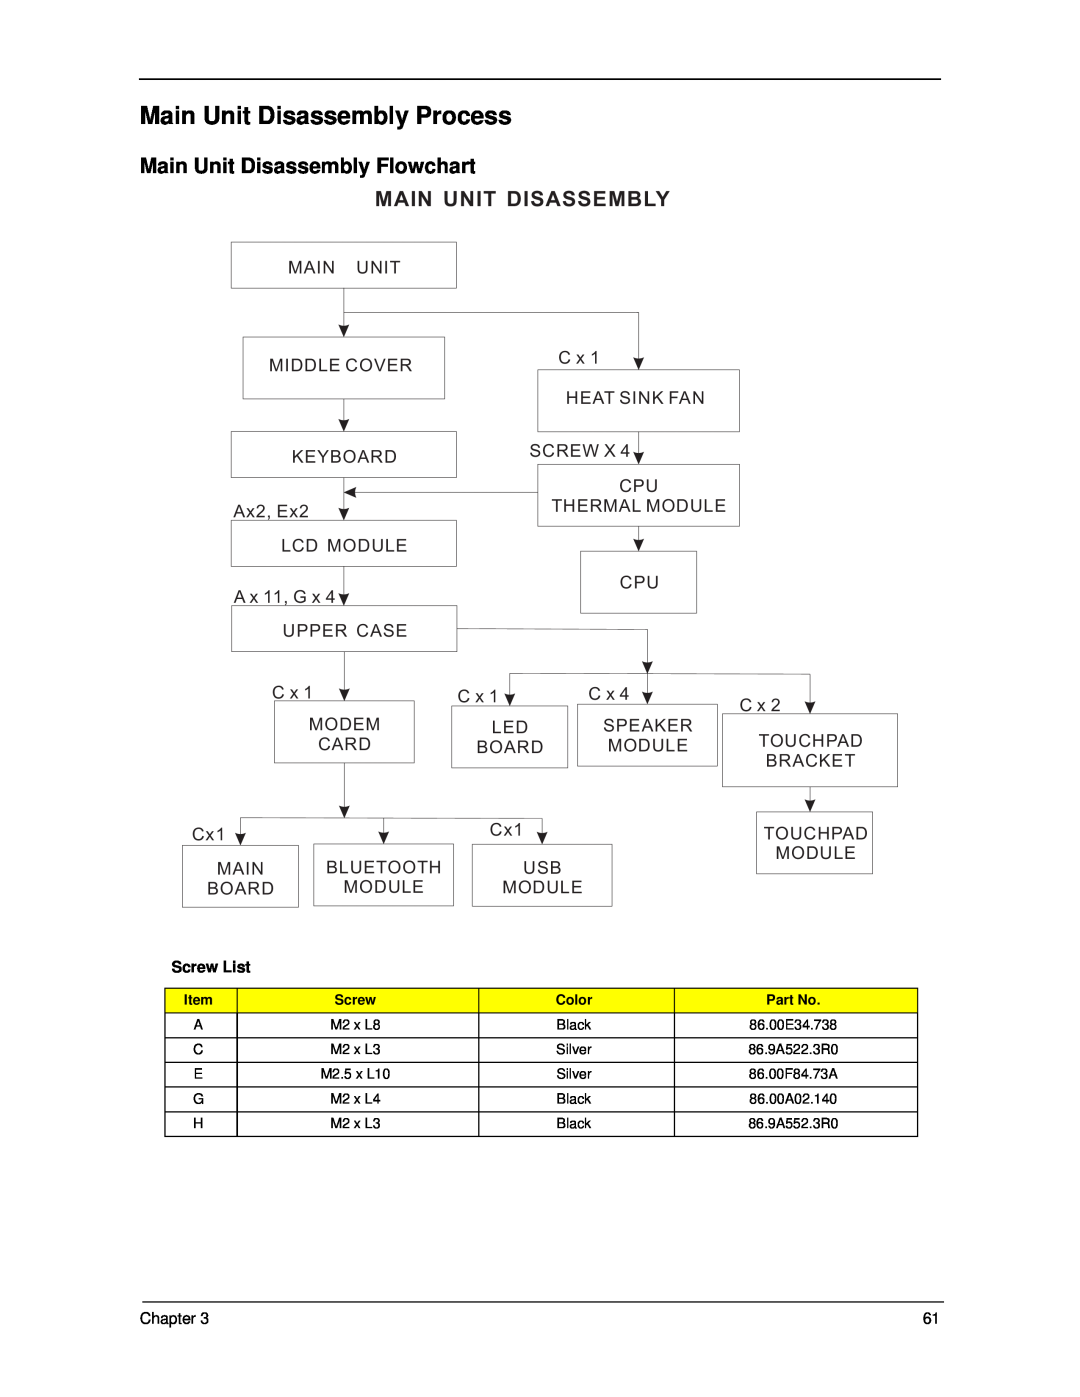 Acer 5330 manual Main Unit Disassembly Process, Main Unit Disassembly Flowchart 